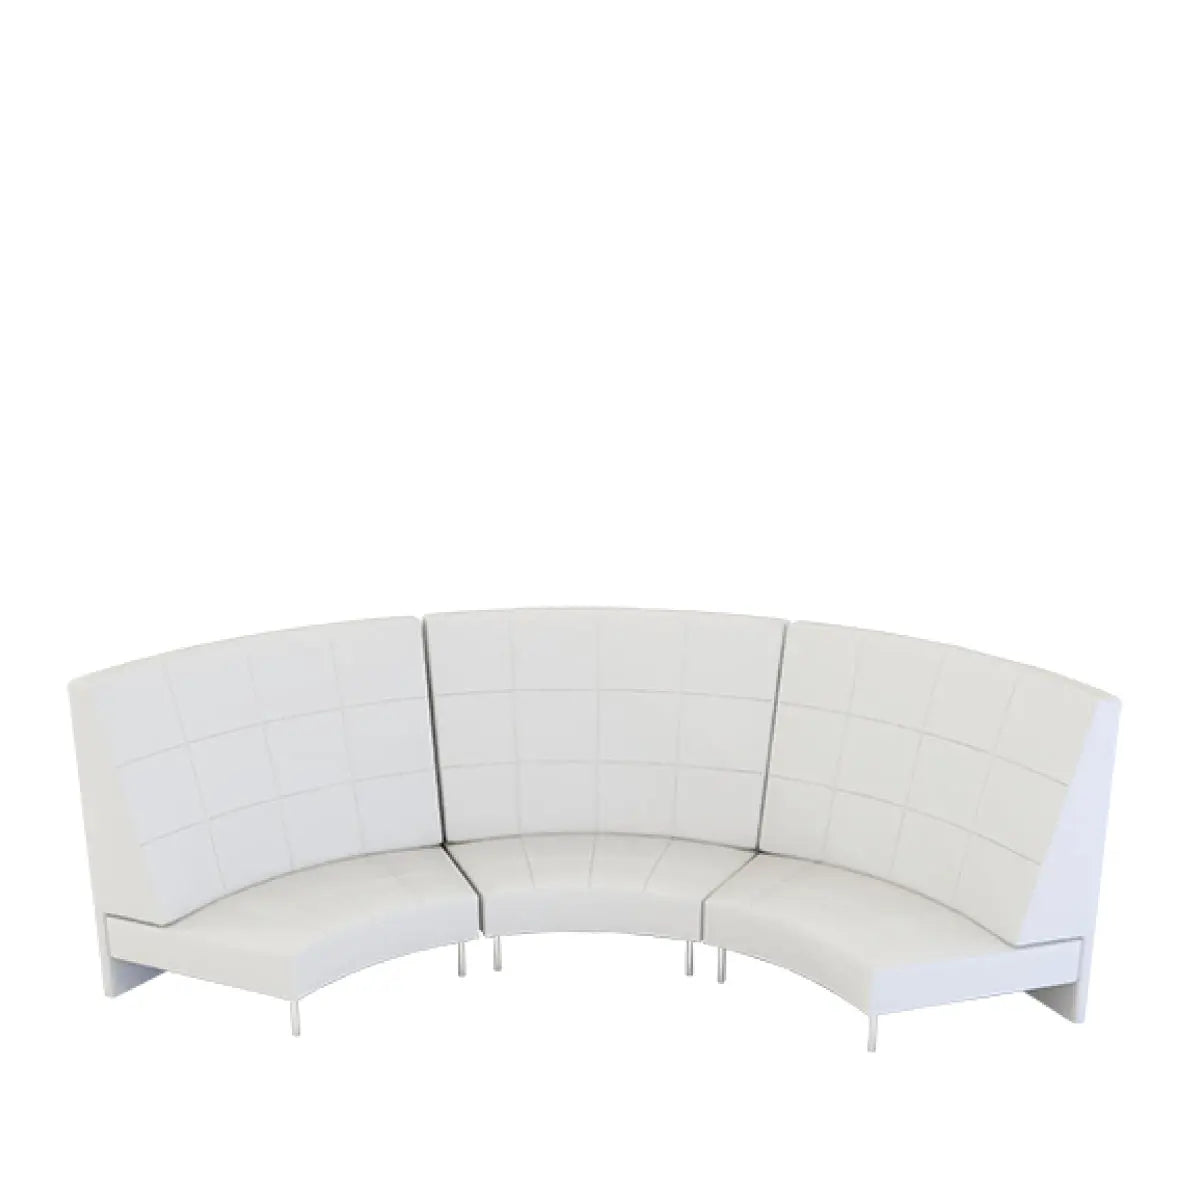 Endless 6 seater curved sofa with large high back Desert River Rentals